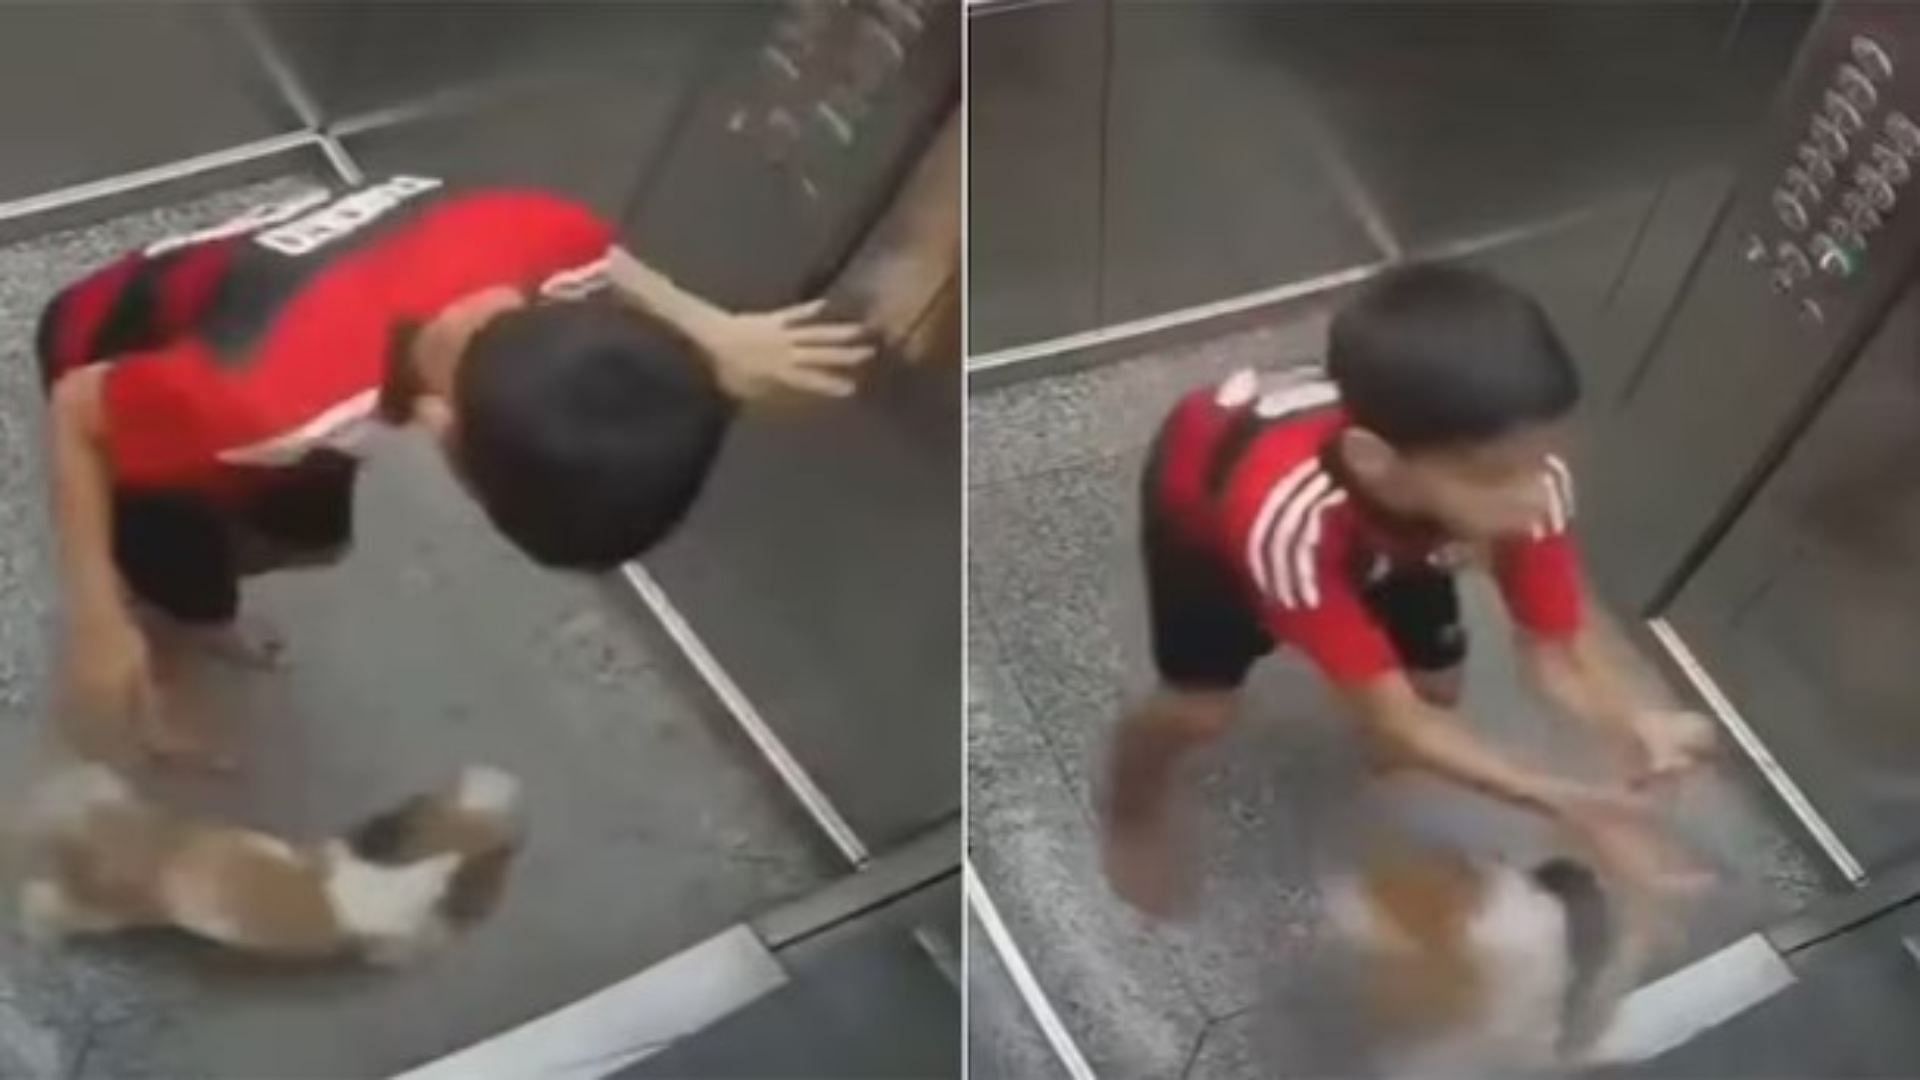 heroic kid risked his own life to save a little puppy life video went viral on social media